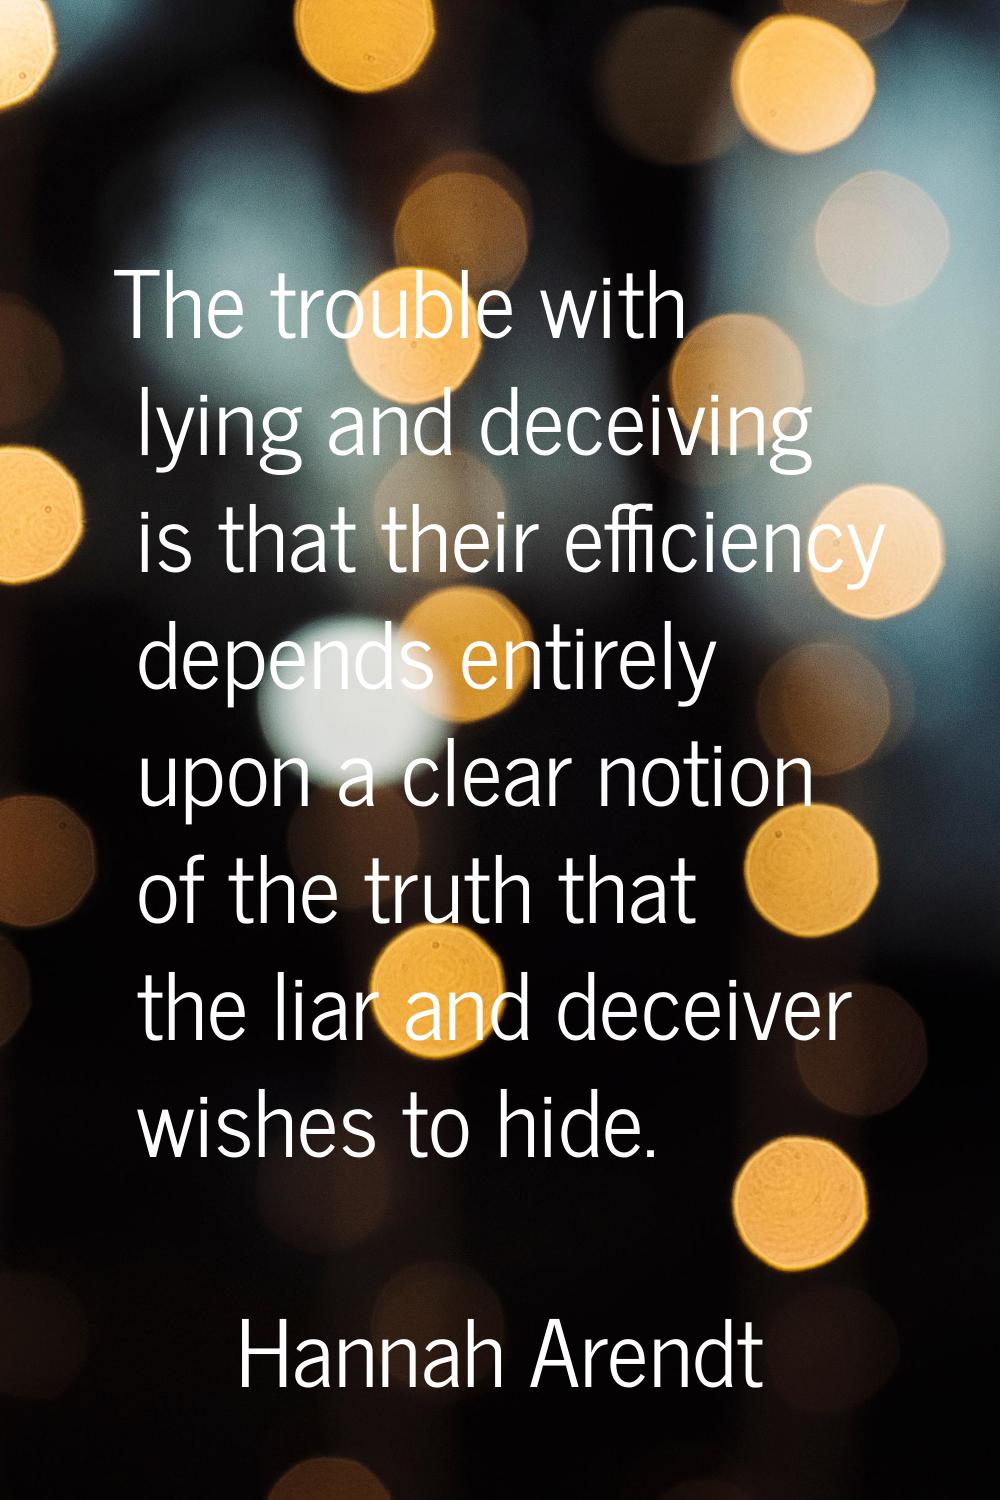 The trouble with lying and deceiving is that their efficiency depends entirely upon a clear notion 